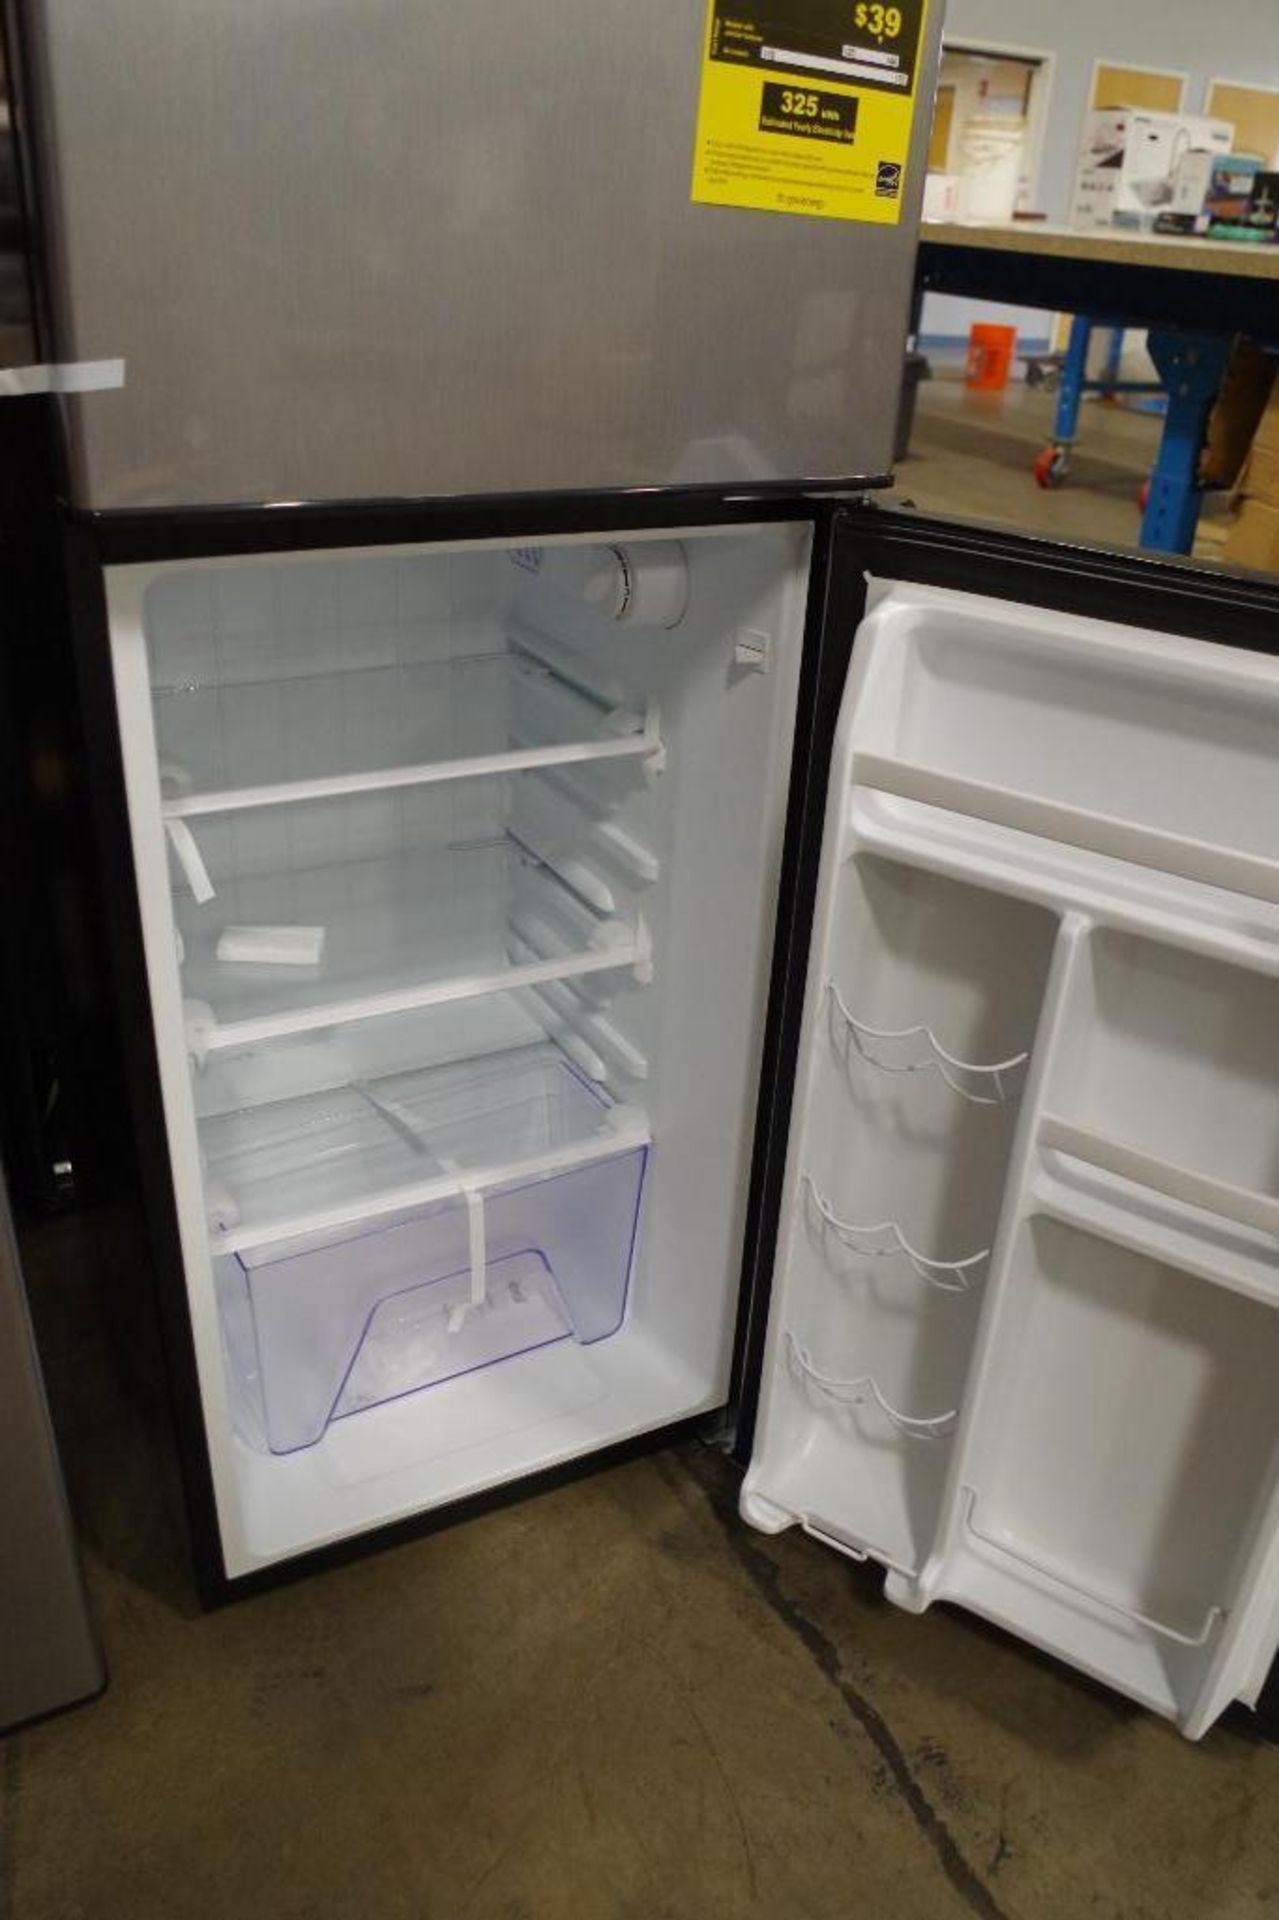 UNUSED Whirlpool® 4.6 cu. ft. Top-mount Refrigerator with Stainless Steel Look M/N WH46TS1E - Image 2 of 6